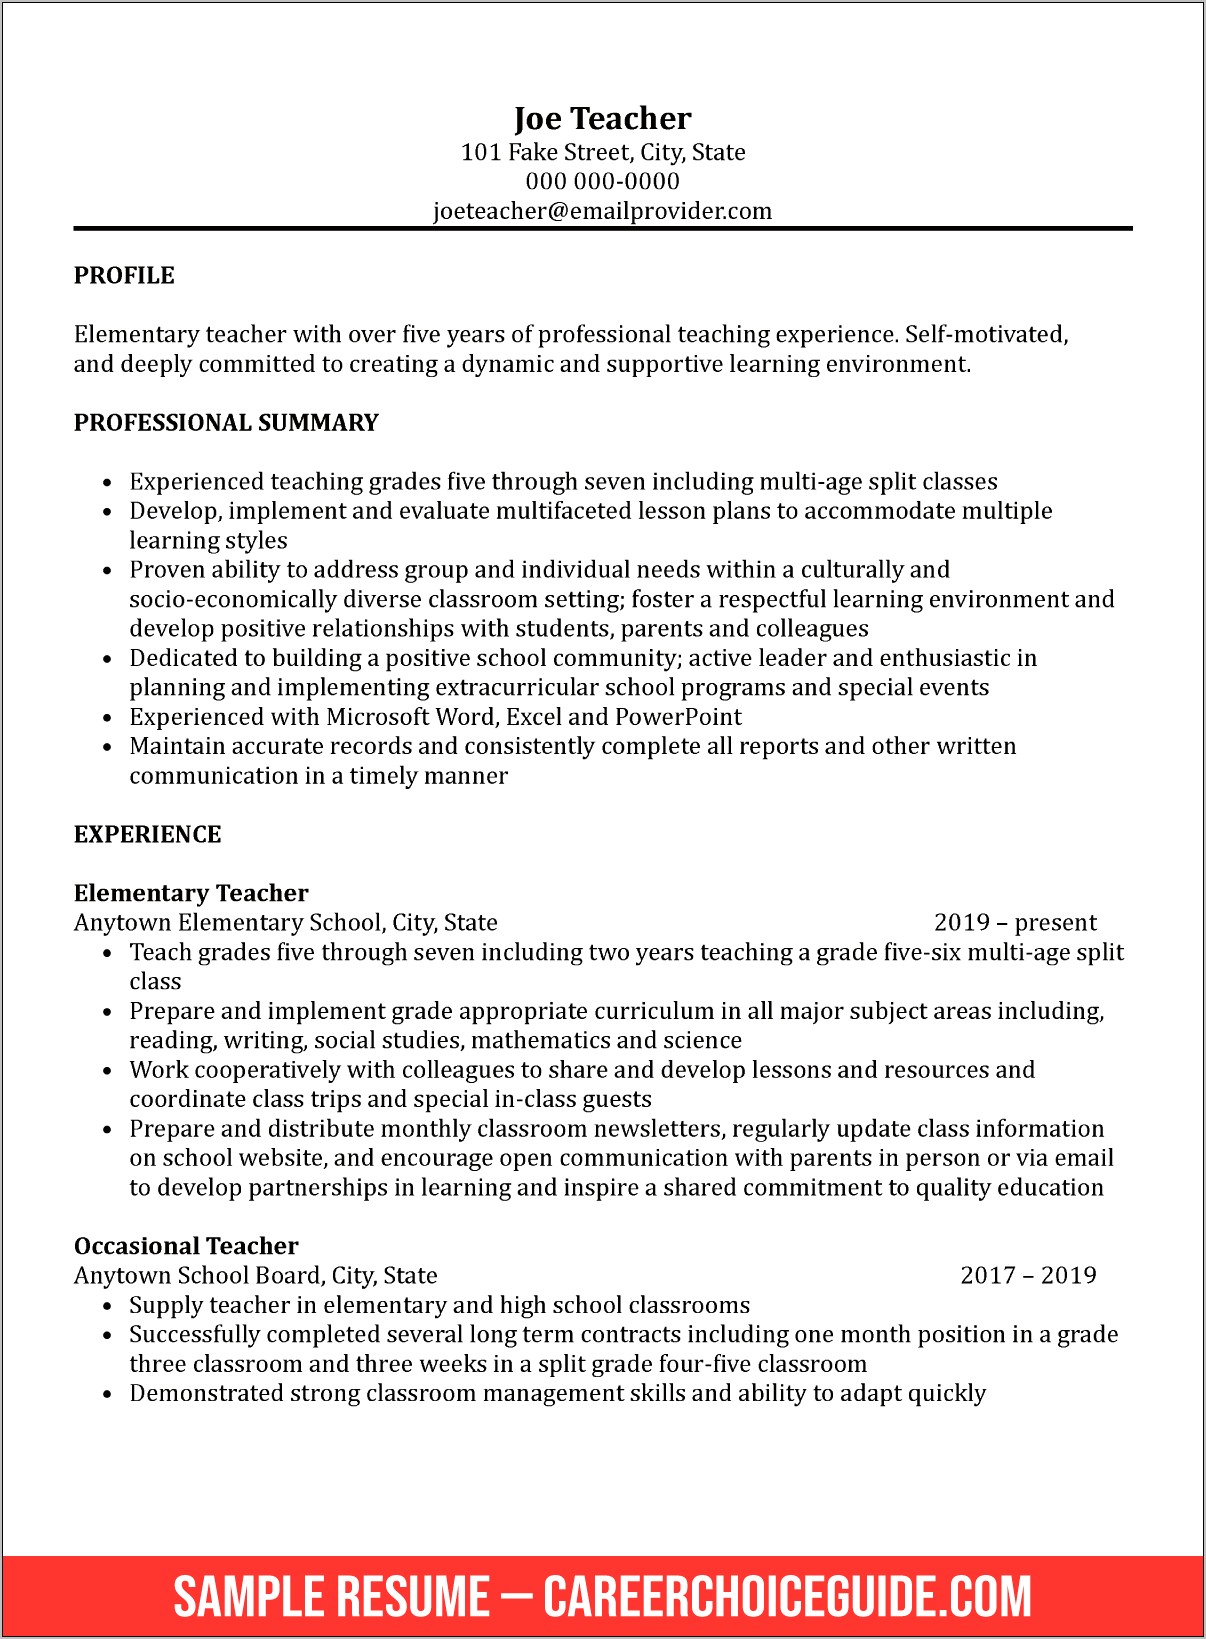 Professional Summary For Resume With Little Experience